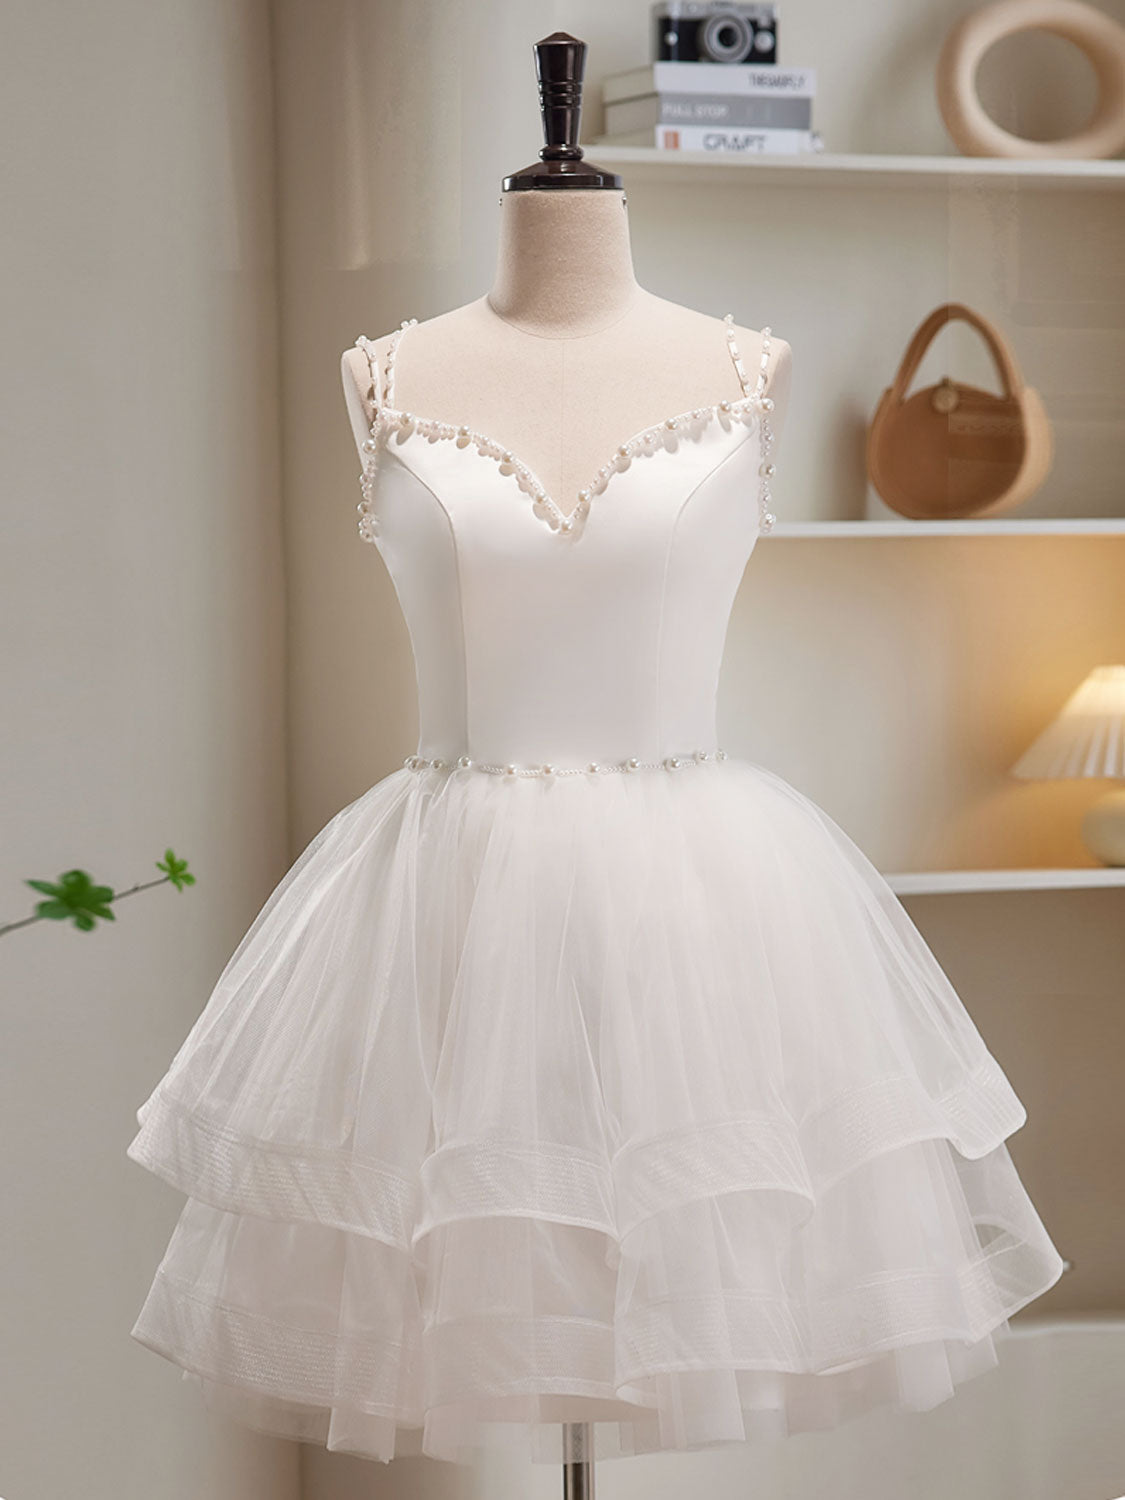 Prom Dressed 2033, White Tulle Short Prom Dresses, Cute White Puffy Homecoming Dresses